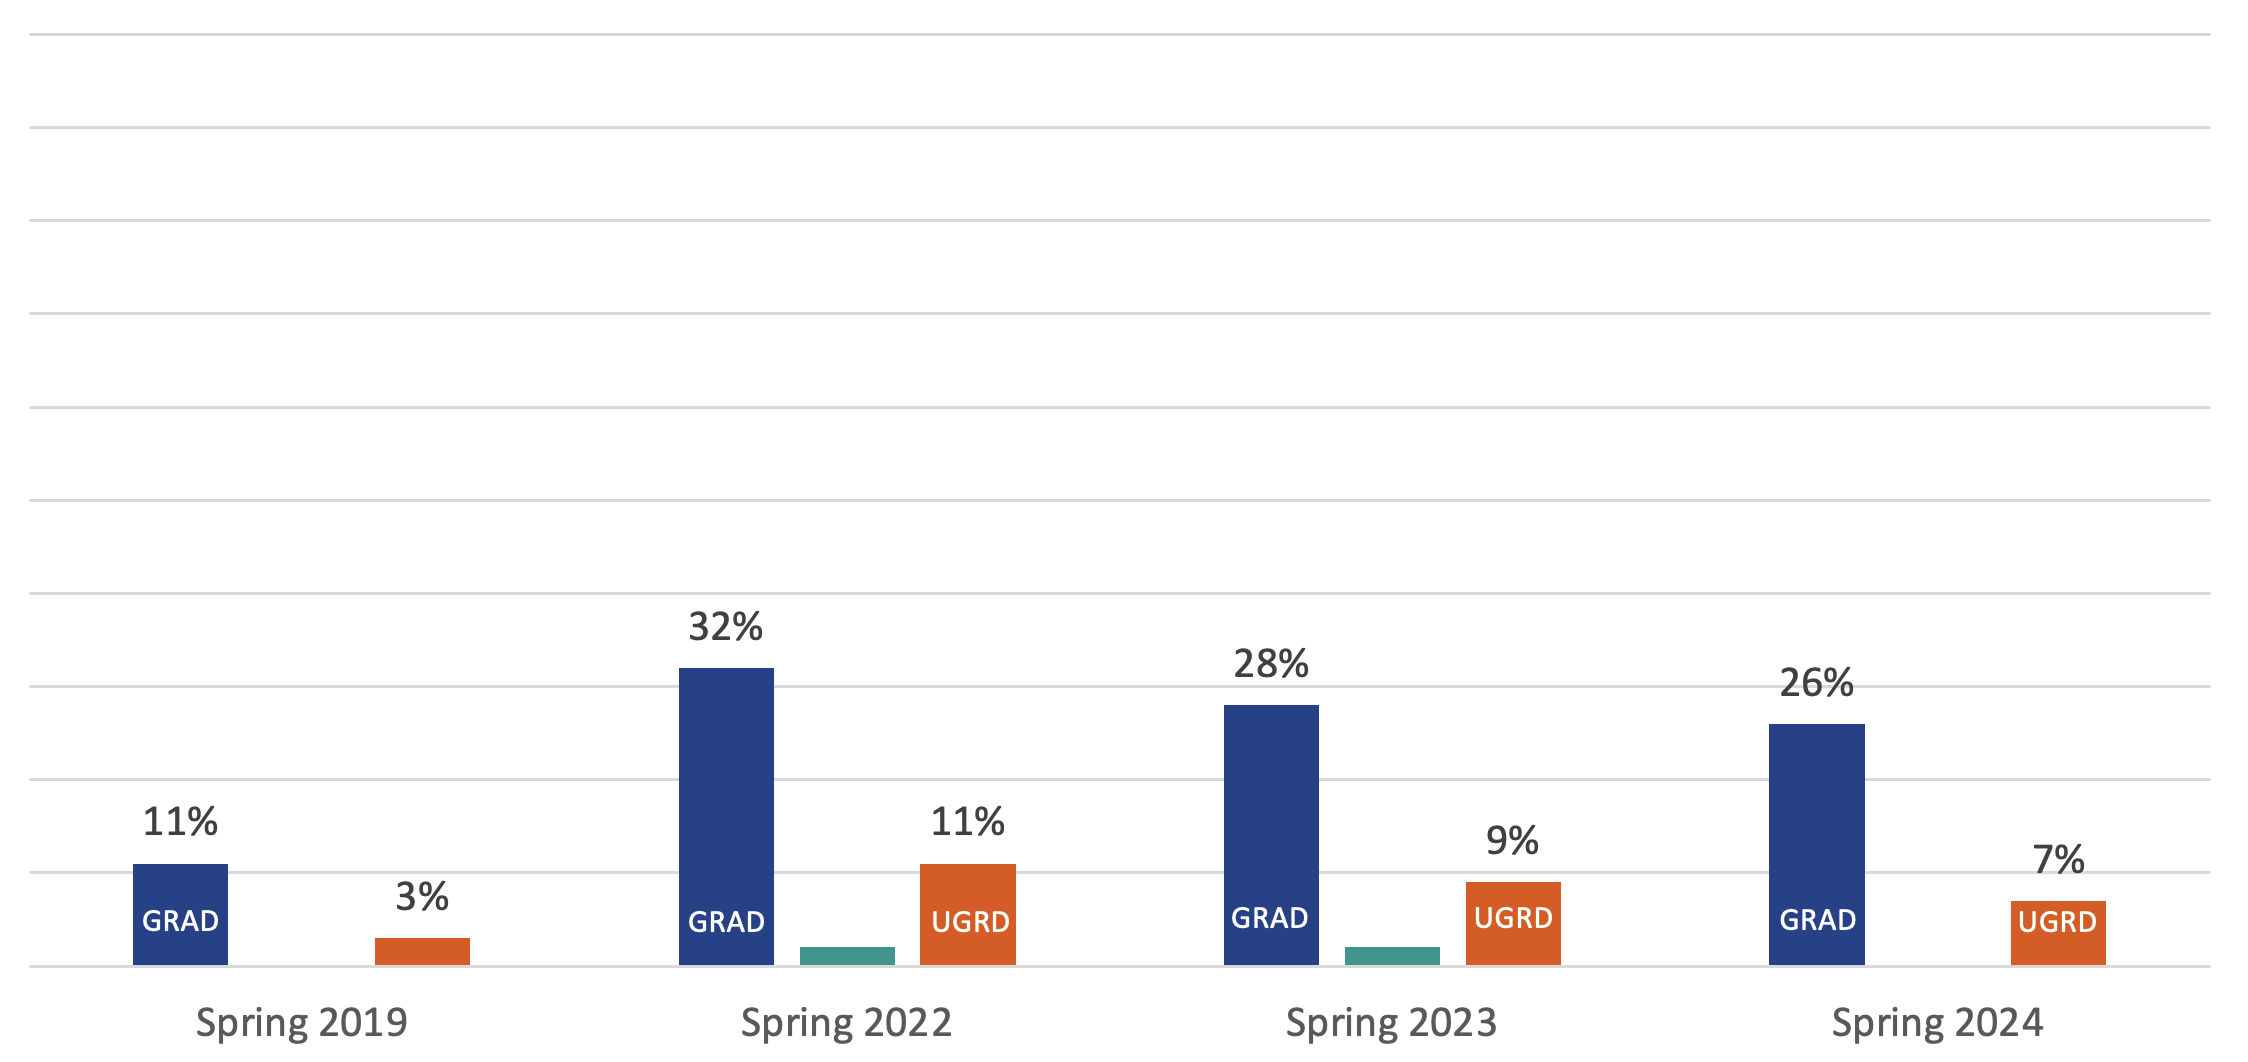 bar chart showing percentage of NIU students taking only online courses: Spring 2019, GRAD 11%, UGRD 3%; Spring 2022 GRAD 32%, UGRD 11%; Spring 2023 GRAD 28%, LAW 2%, UGRD 9%; Spring 2024, GRAD 26%, LAW 0%, UGRD 7% 